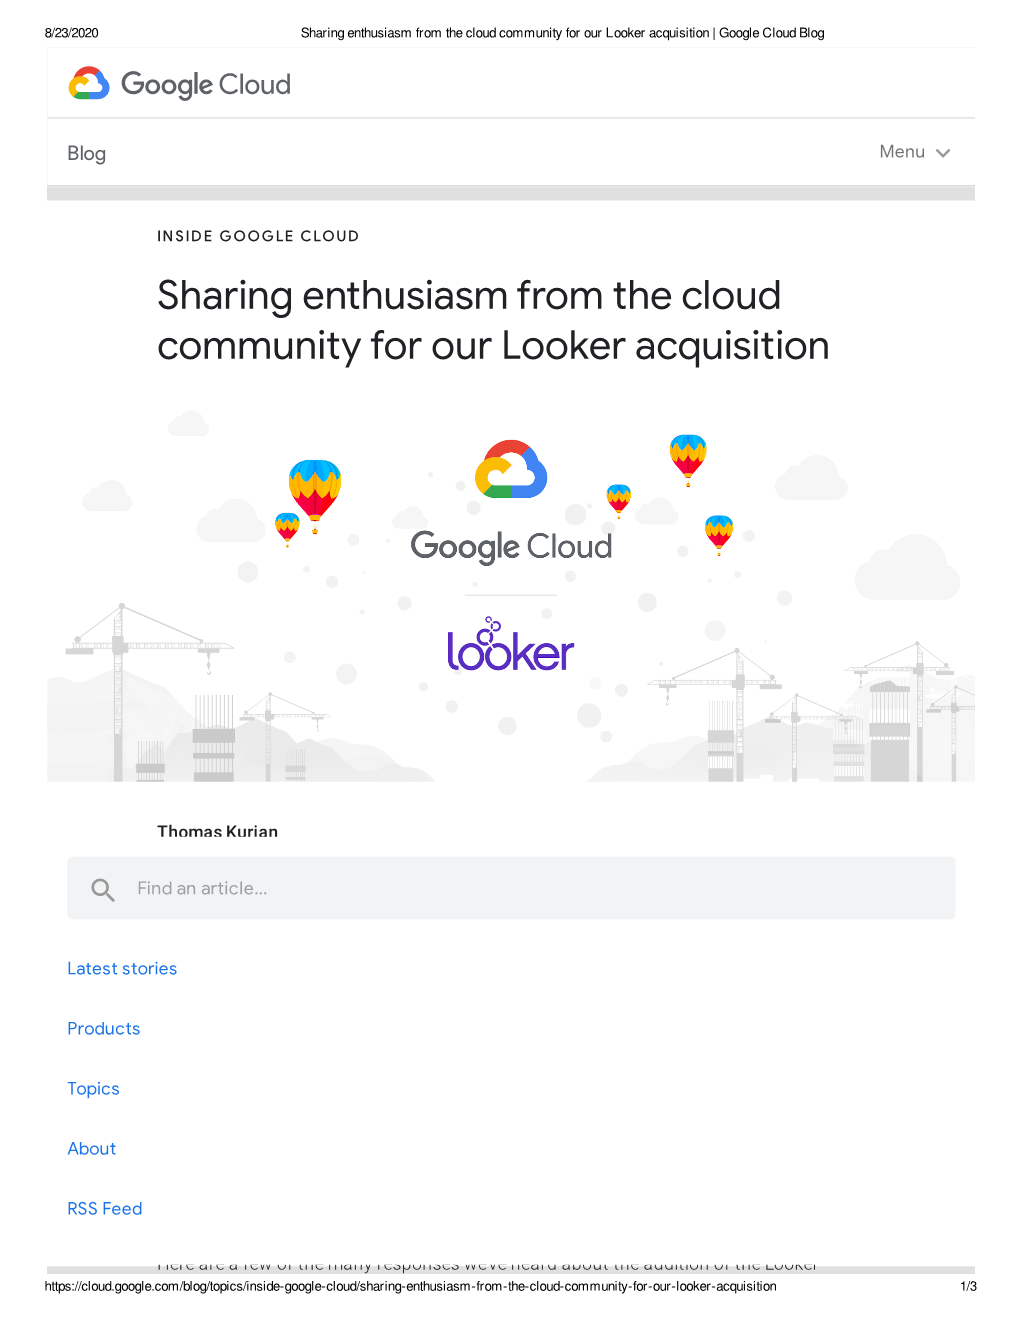 Sharing Enthusiasm from the Cloud Community for Our Looker Acquisition | Google Cloud Blog